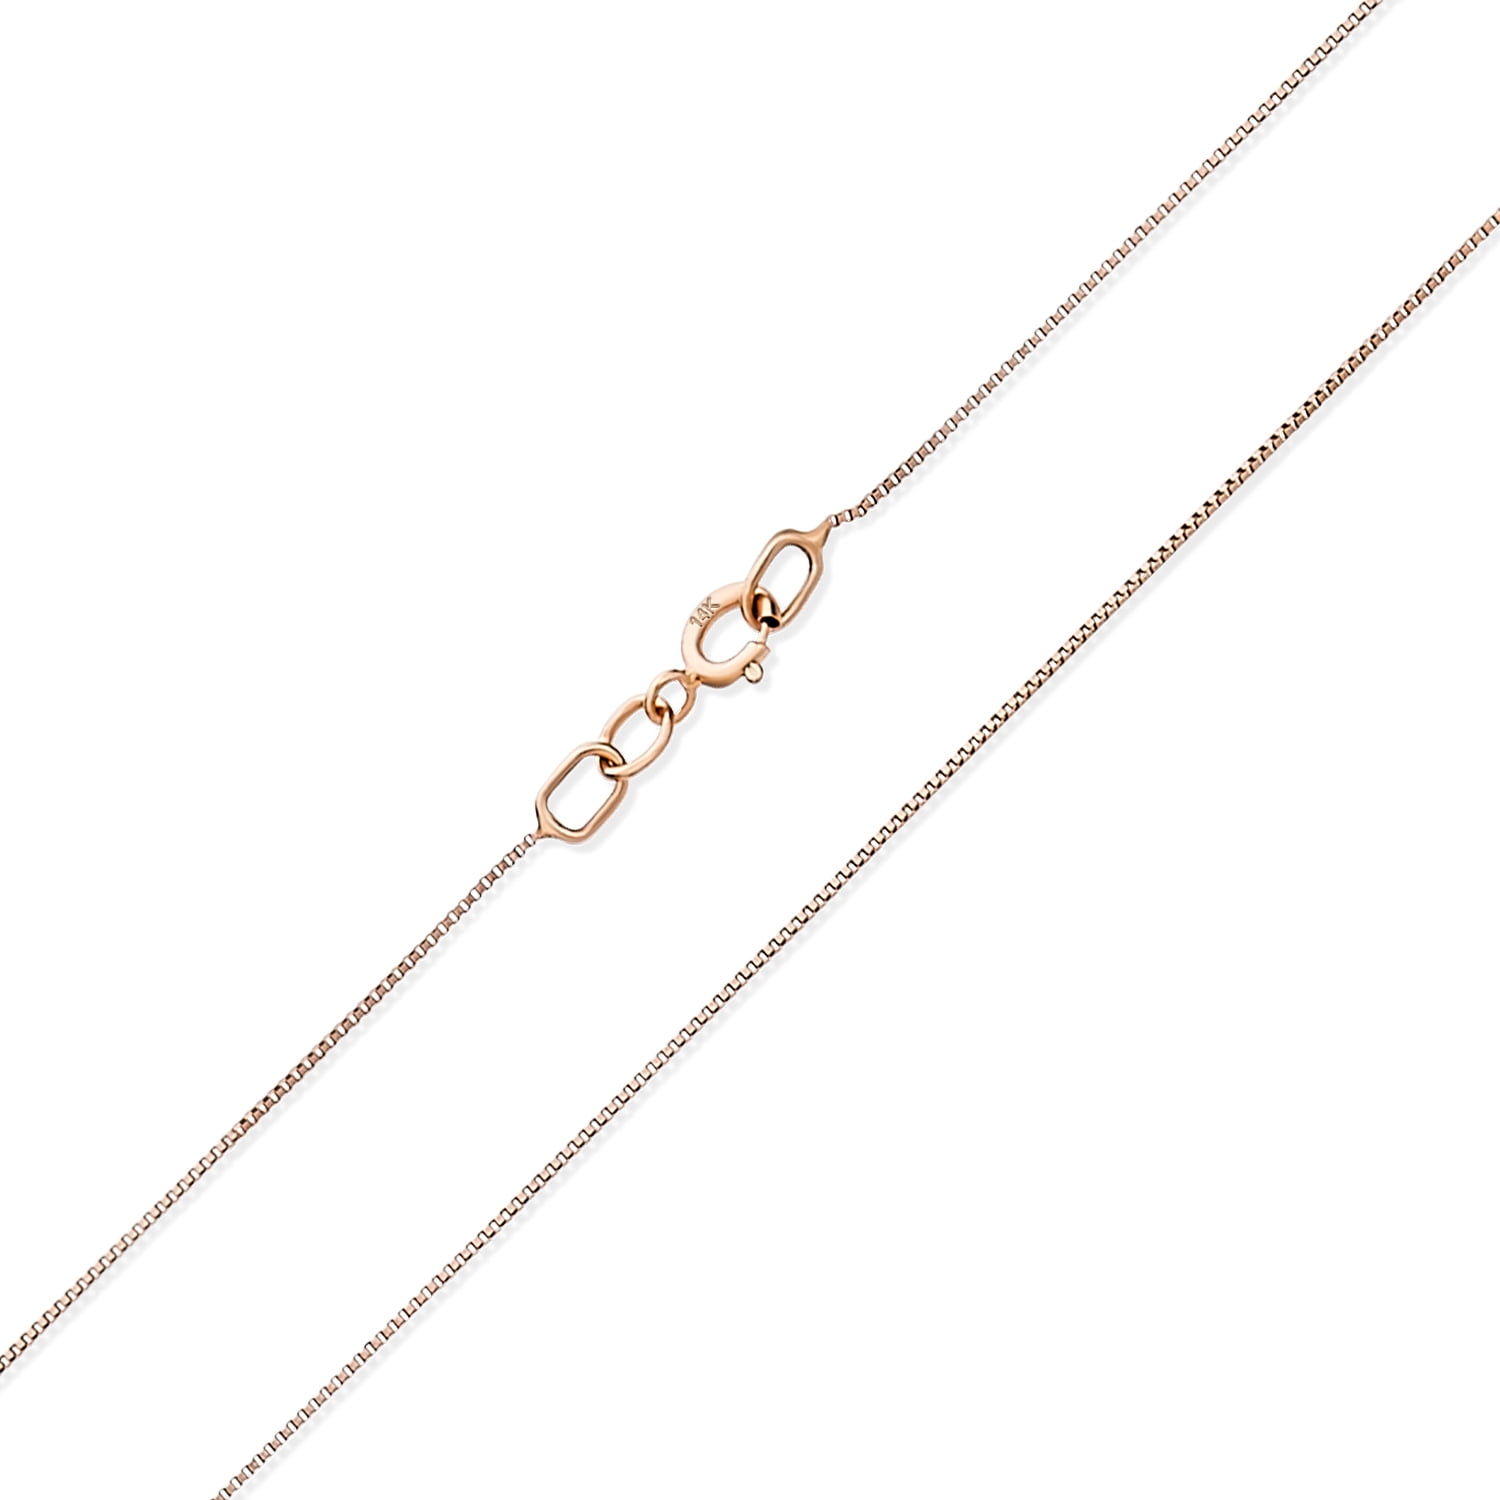 14k solid rose pink gold 1mm singapore chain necklace 16-24